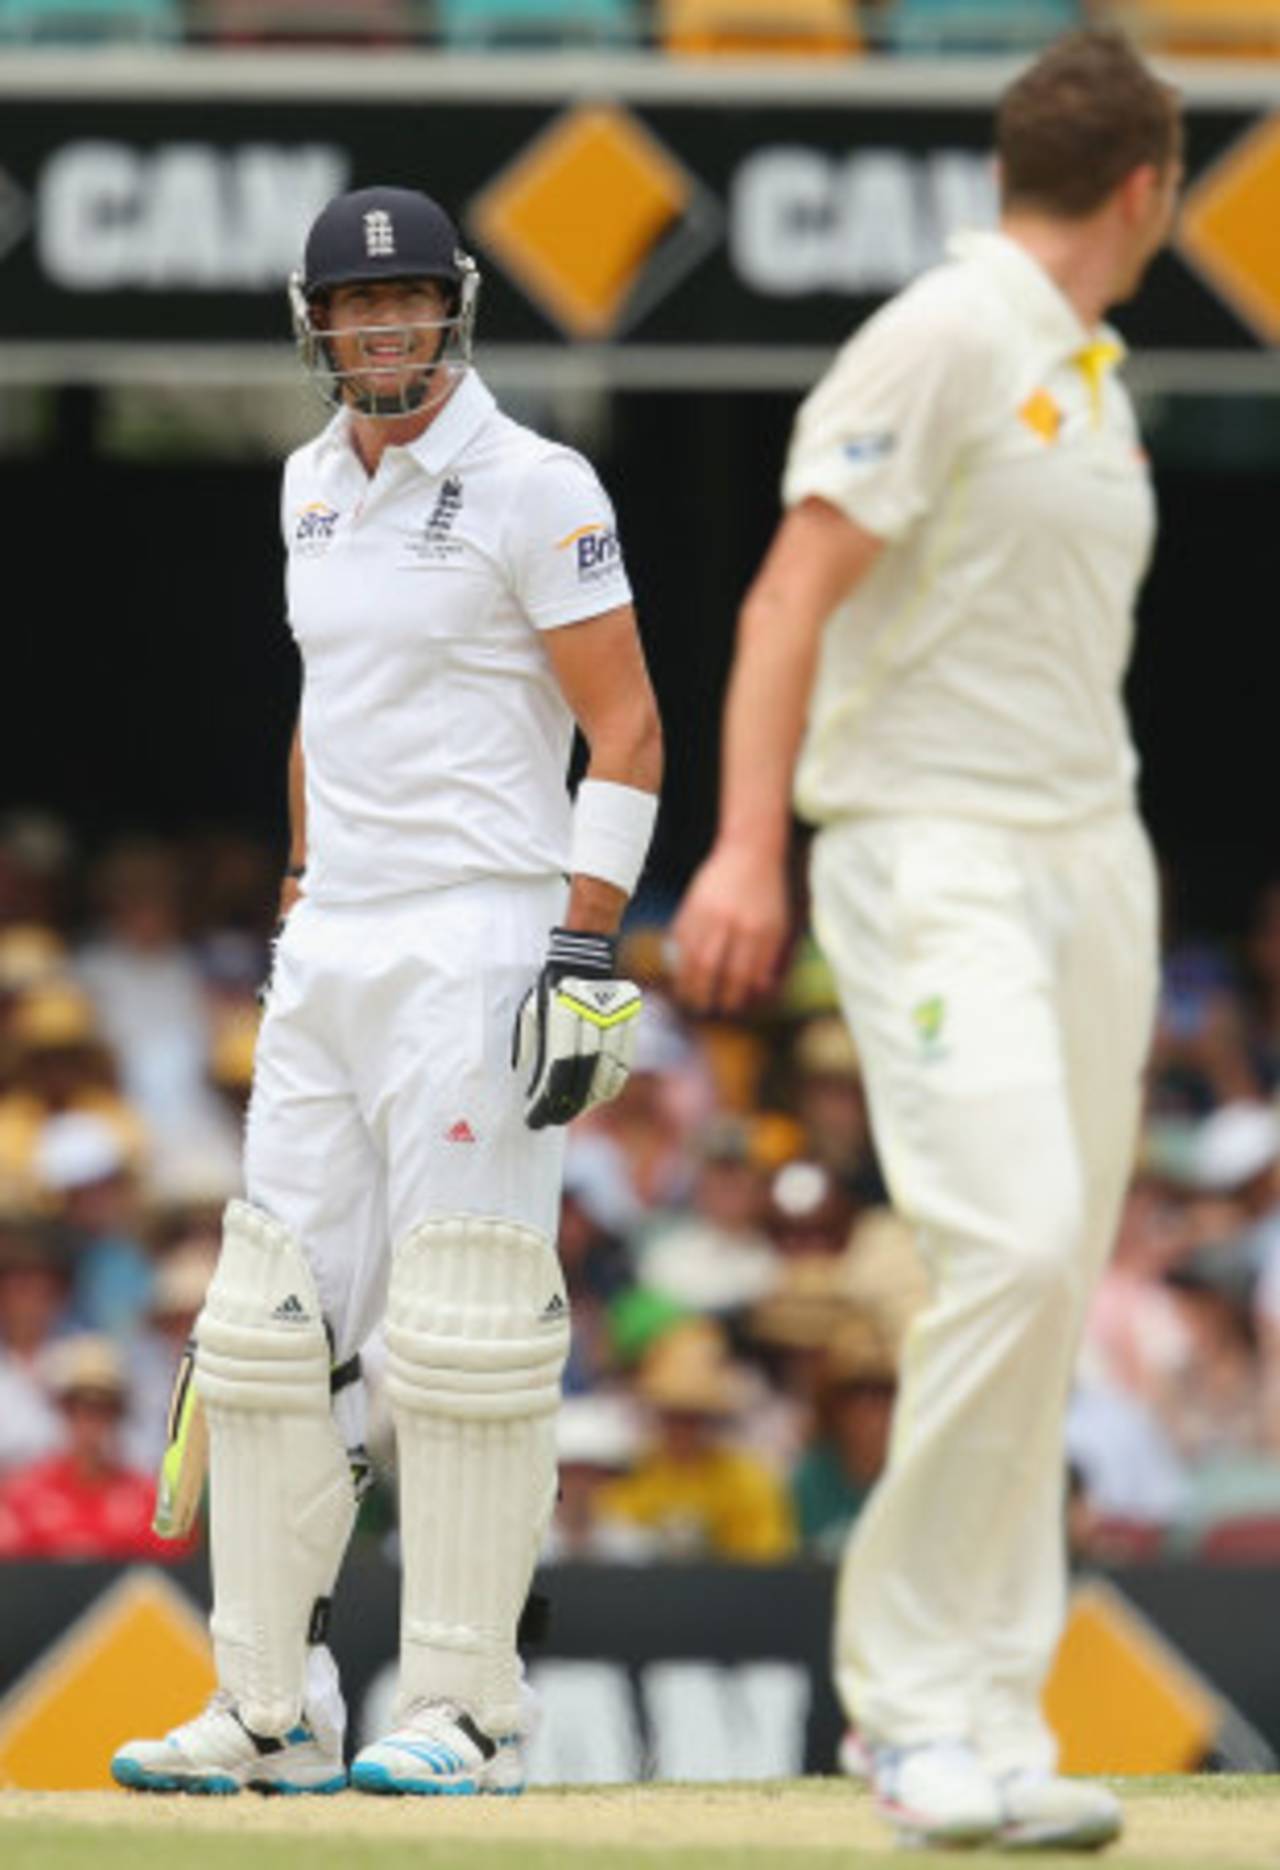 Peter Siddle tested Kevin Pietersen early on, Australia v England, 1st Test, Brisbane, 4th day, November 24, 2013